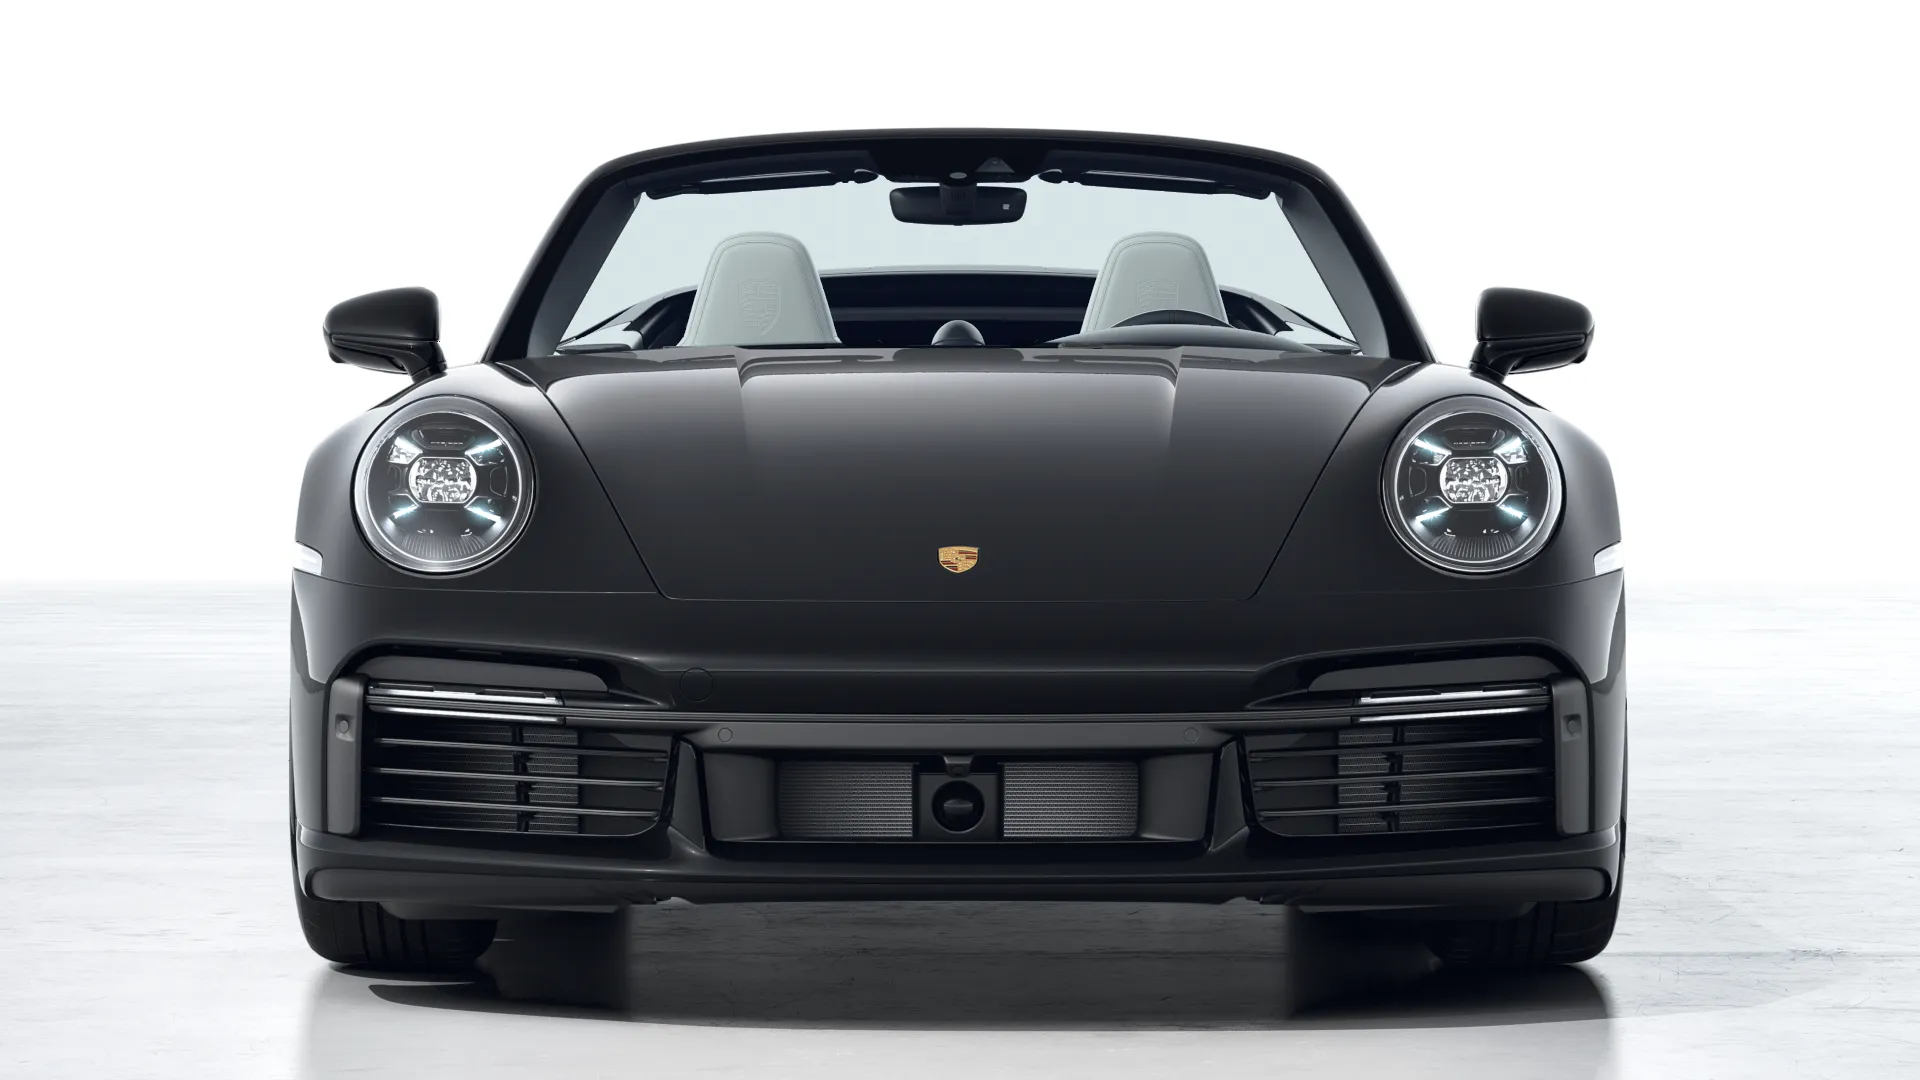 Exterior view of 911 Turbo Cabriolet